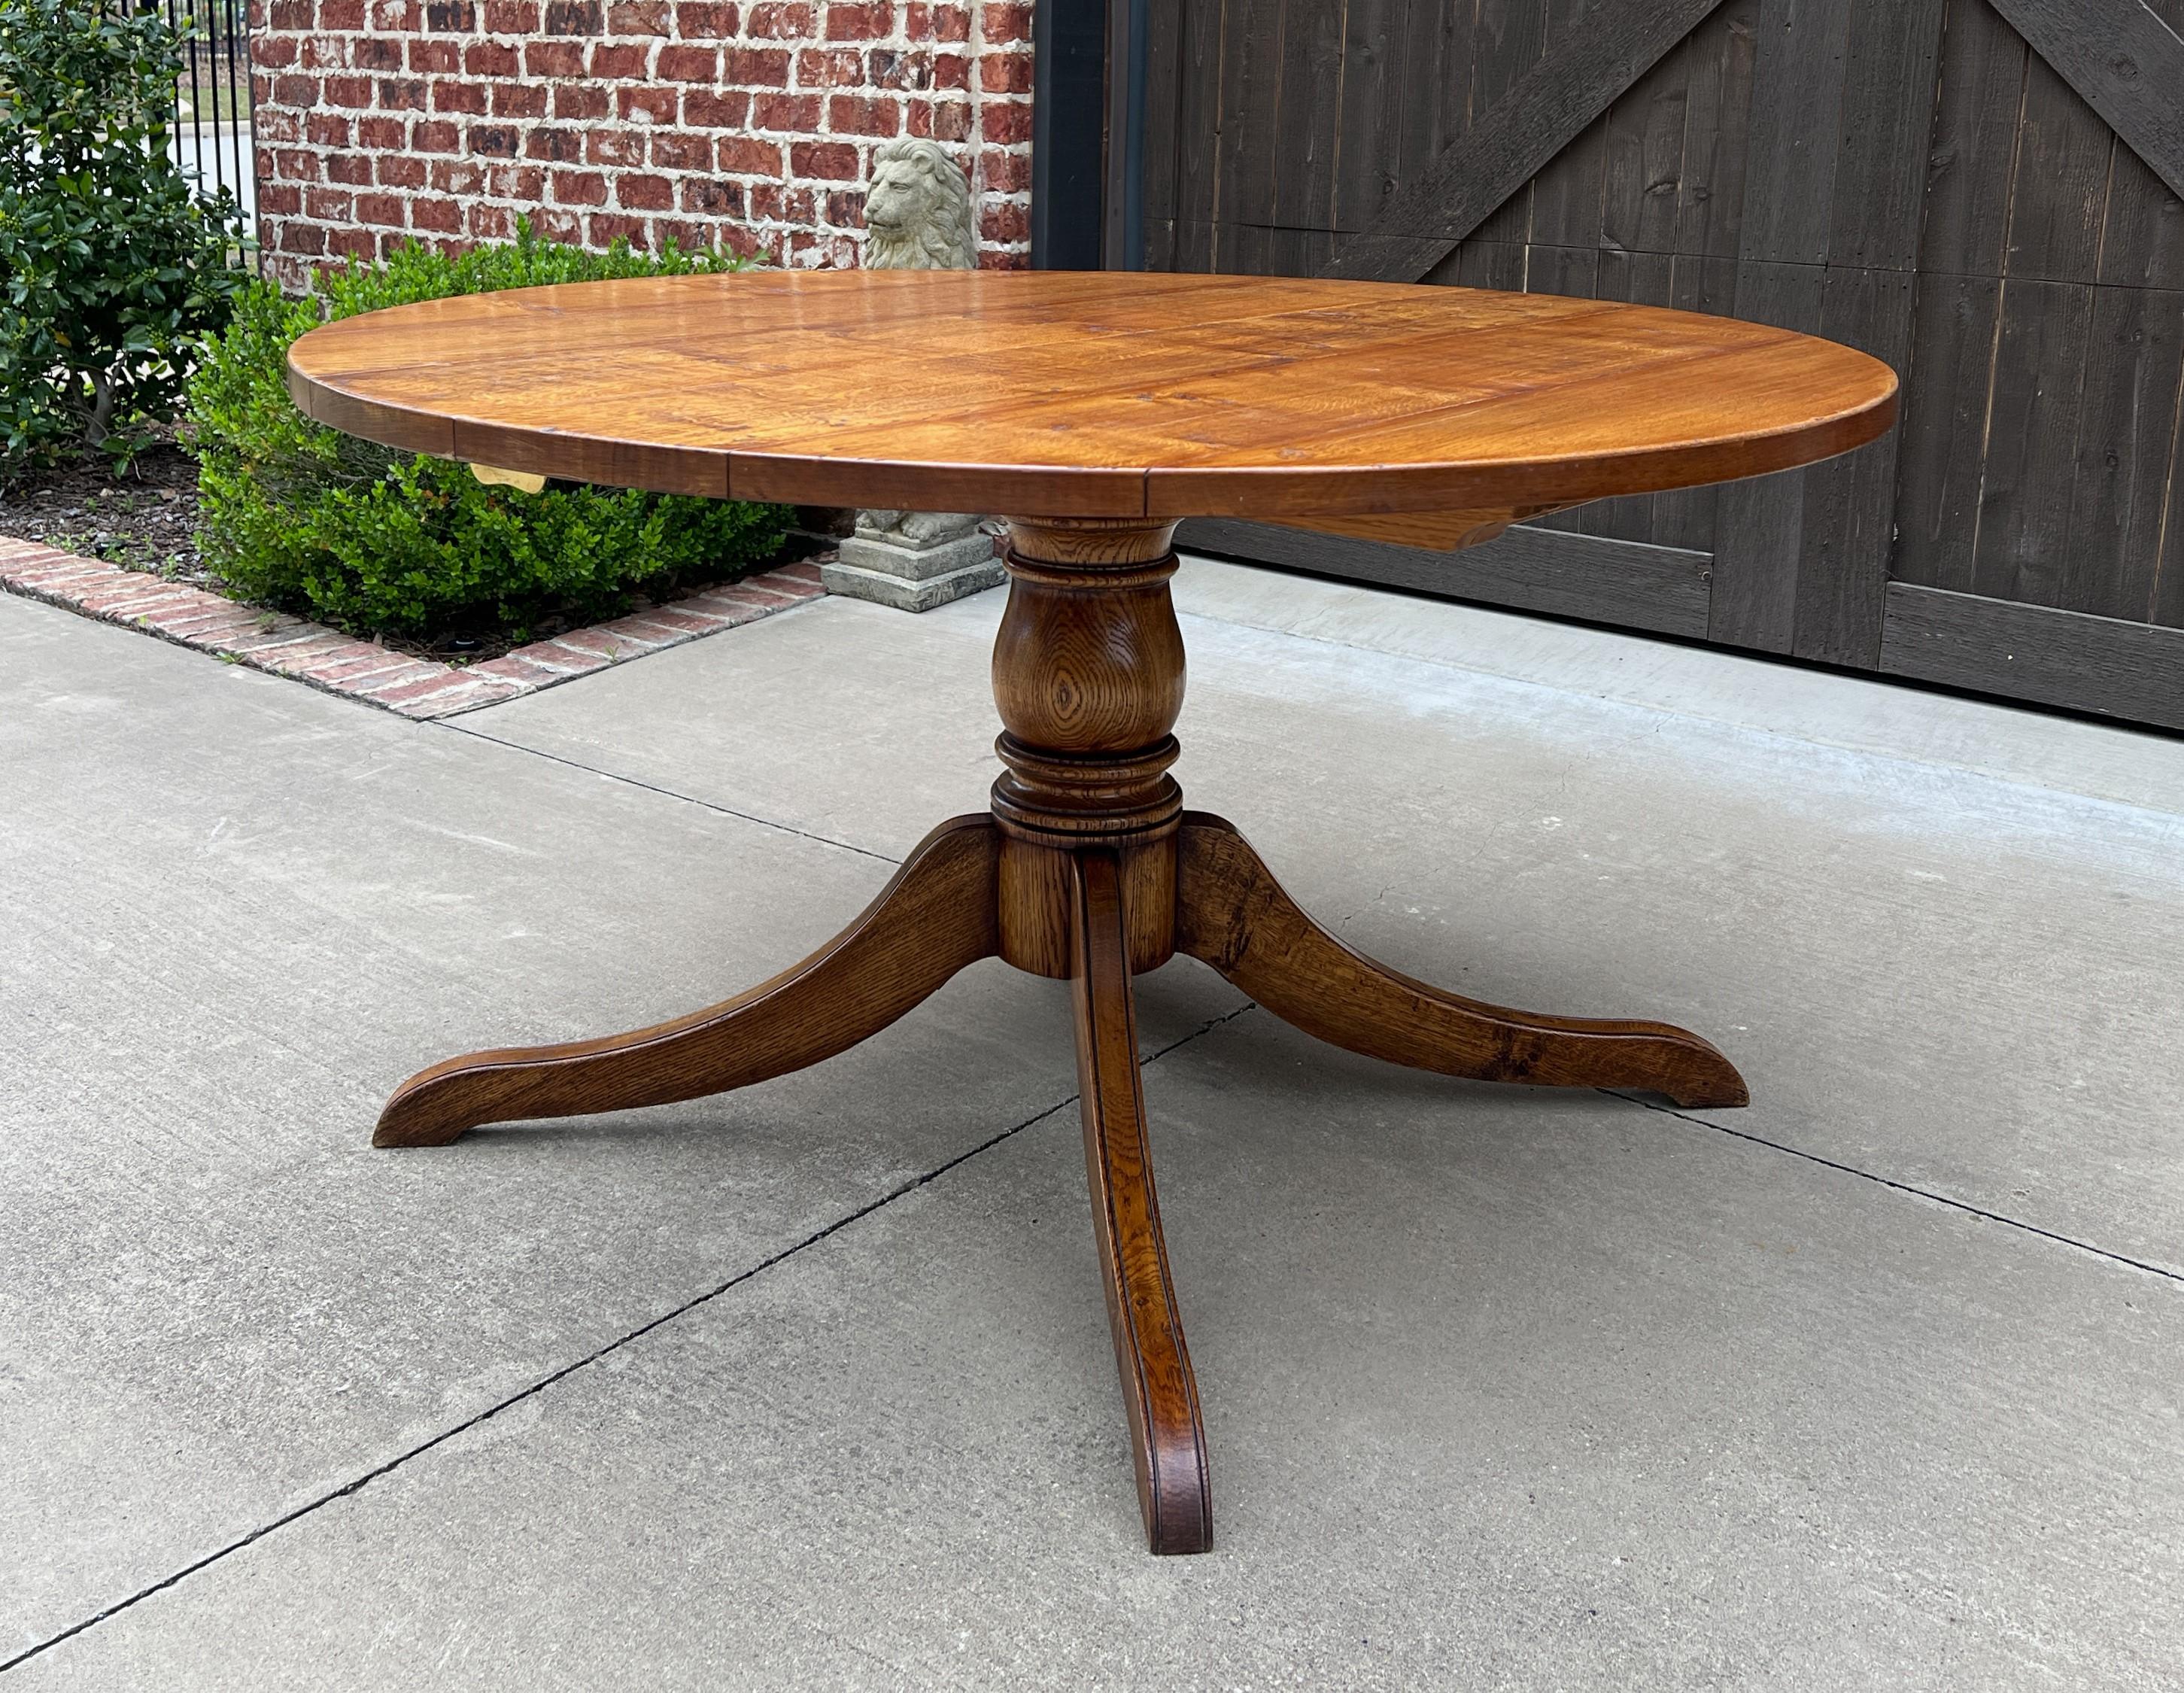 Mid-Century Modern Midcentury English Round/Oval Dining Table Pedestal Base with Leaf Oak, c. 1940s